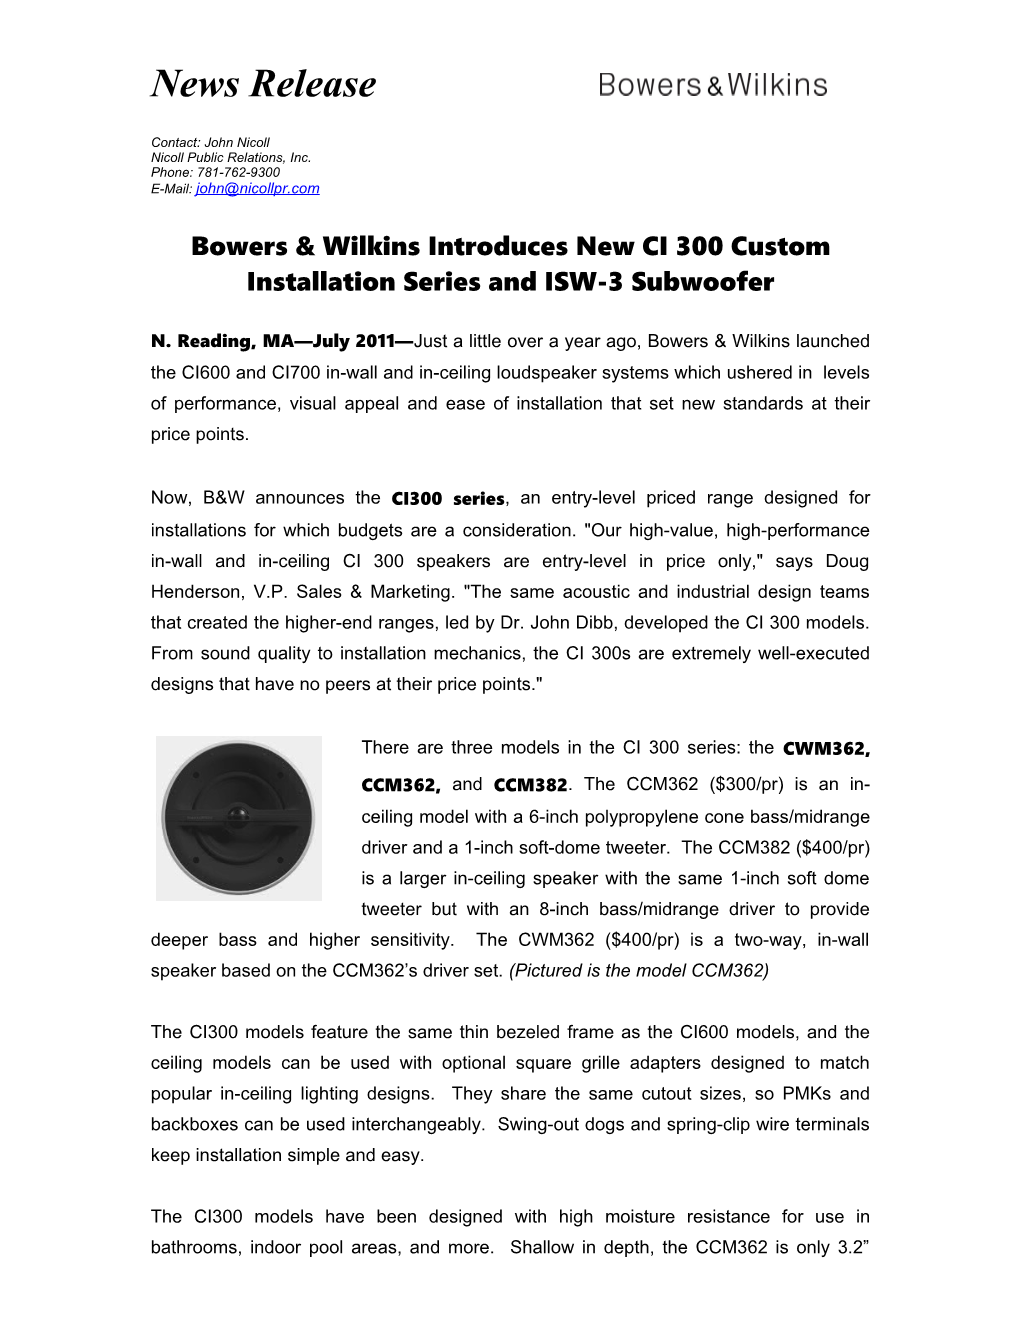 Bowers & Wilkins Introduces New CI 300 Custom Installation Series and ISW-3 Subwoofer